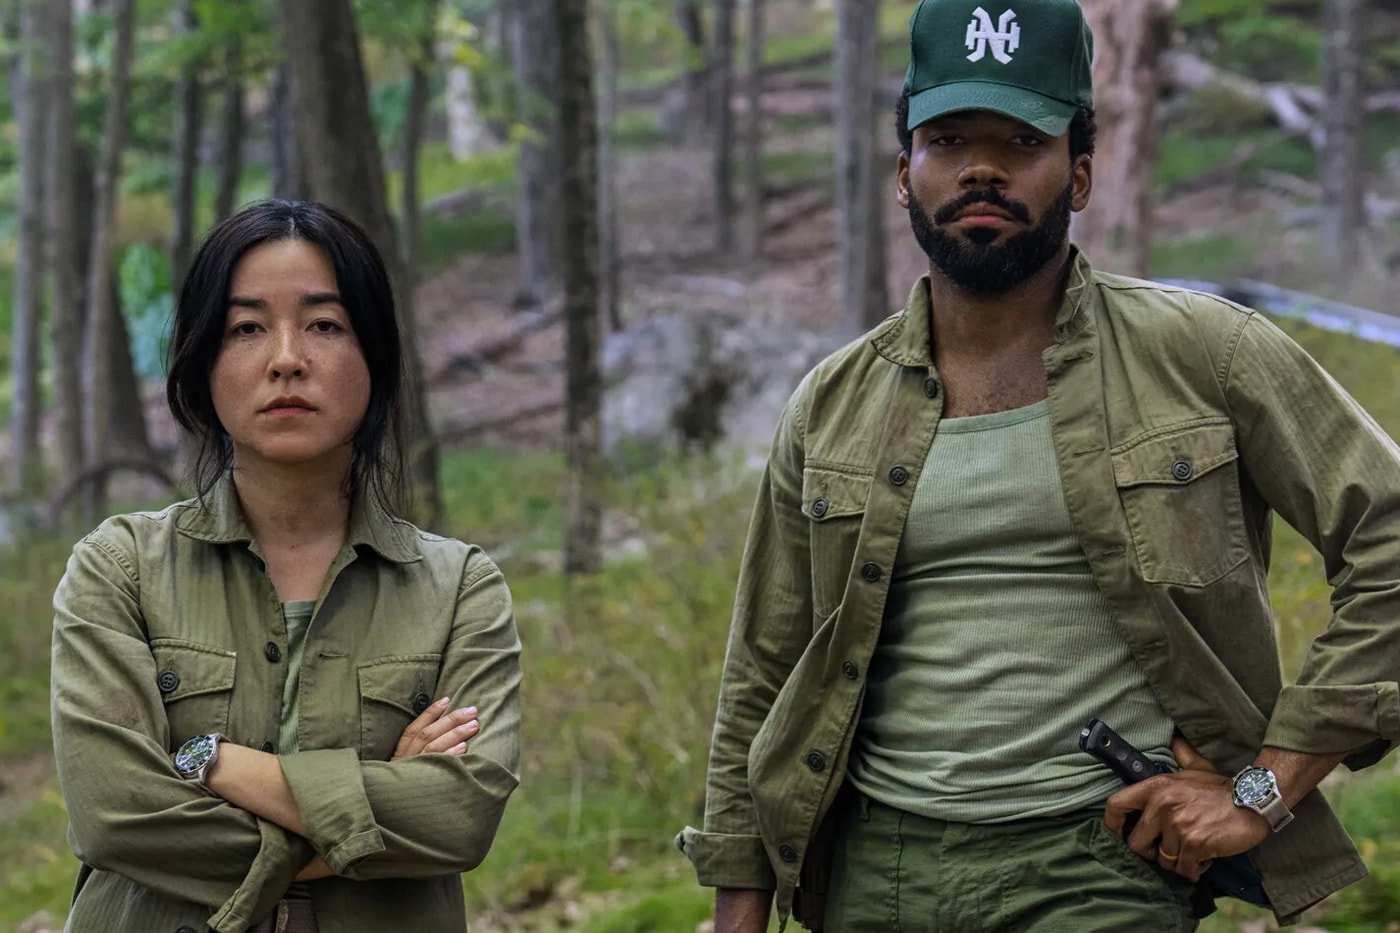 Donald Glover's New Prime Video Series 'Mr. & Mrs. Smith' Has an Official Release Date amazon maya erskine lonely strangers remake of angelina jolie brad pitt 2005 film 